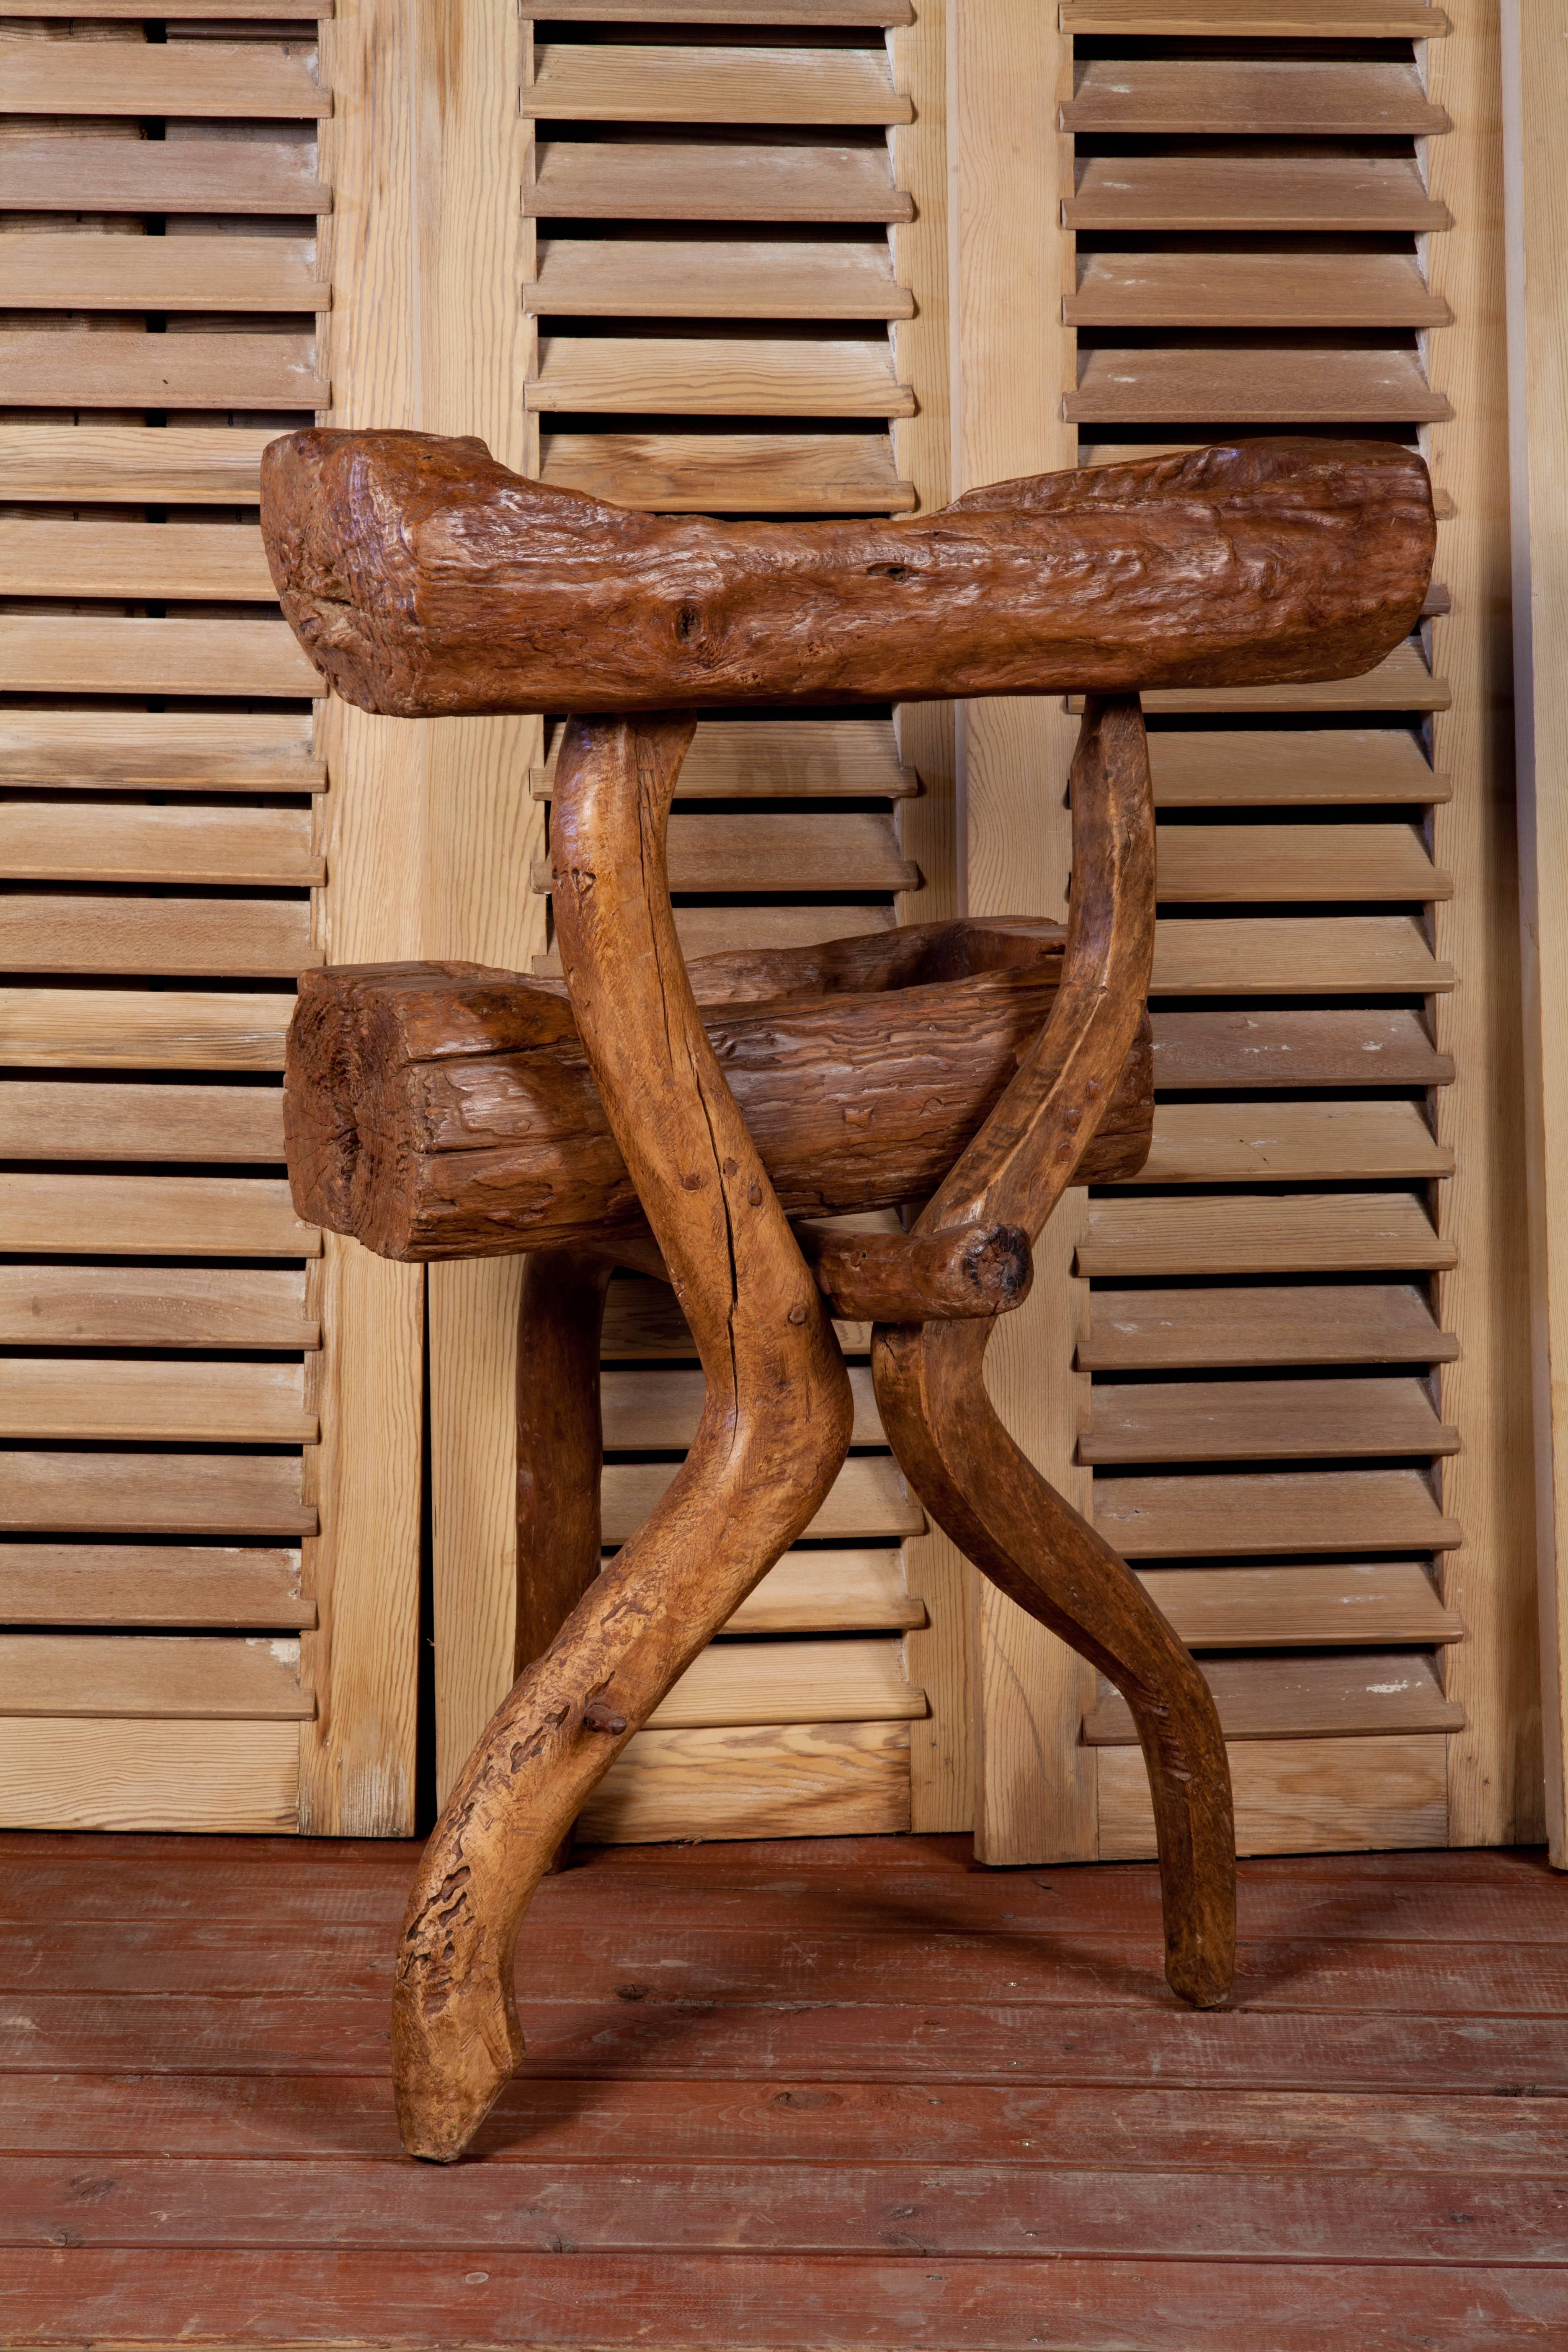 Early 20th Century One of a Kind, Hand-Crafted Two-Tier Rustic Wood Stand from France, circa 1920